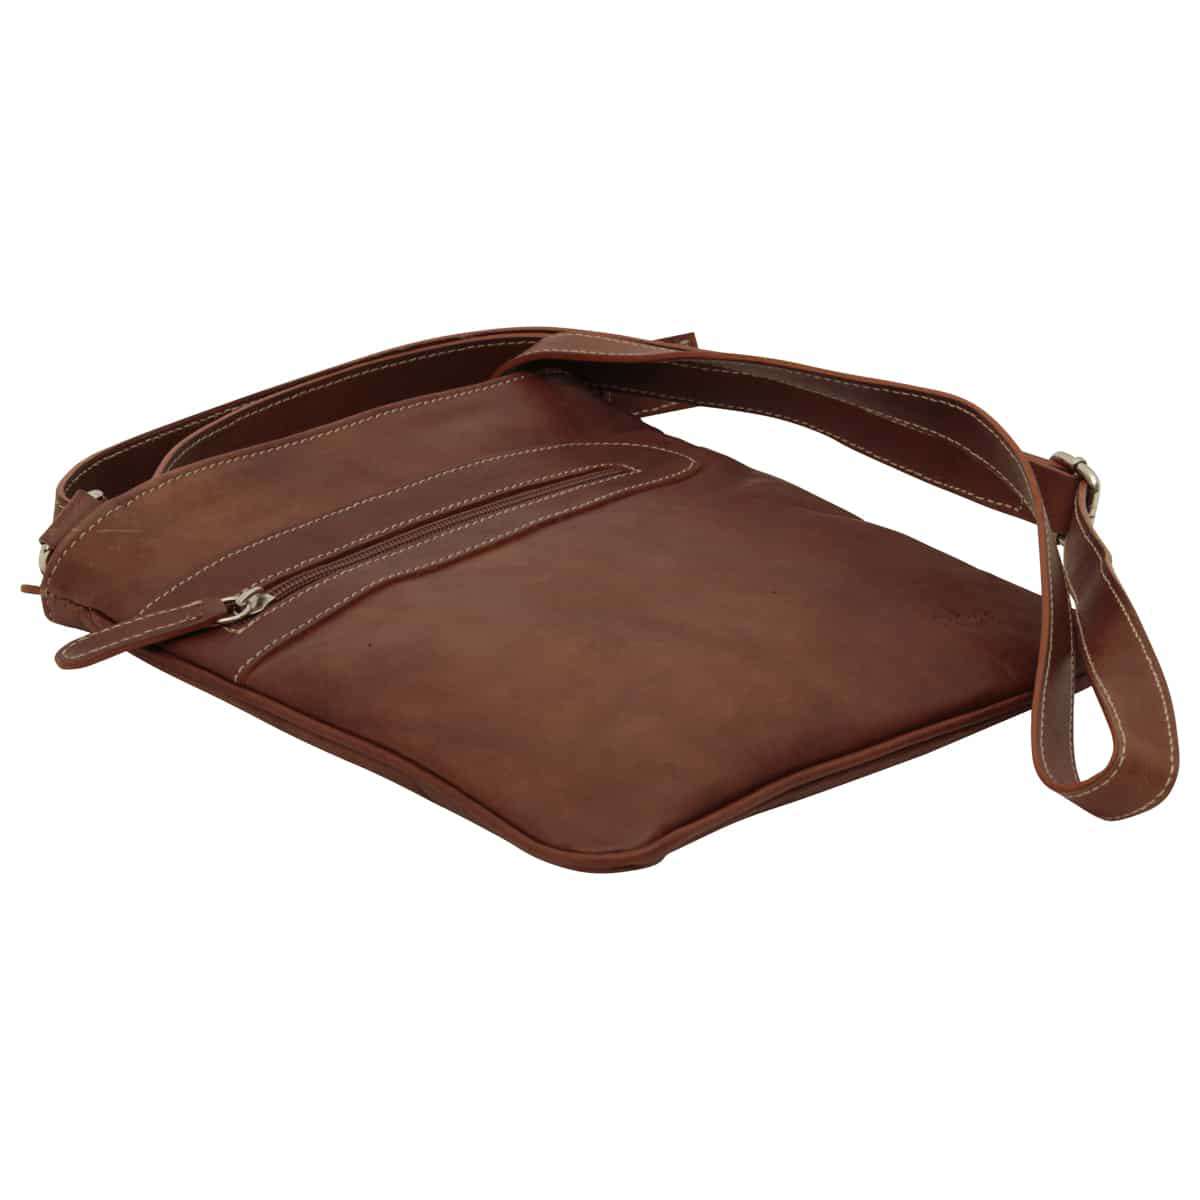 Leather cross body bag with zip pocket - Chestnut | 086161CA US | Old Angler Firenze